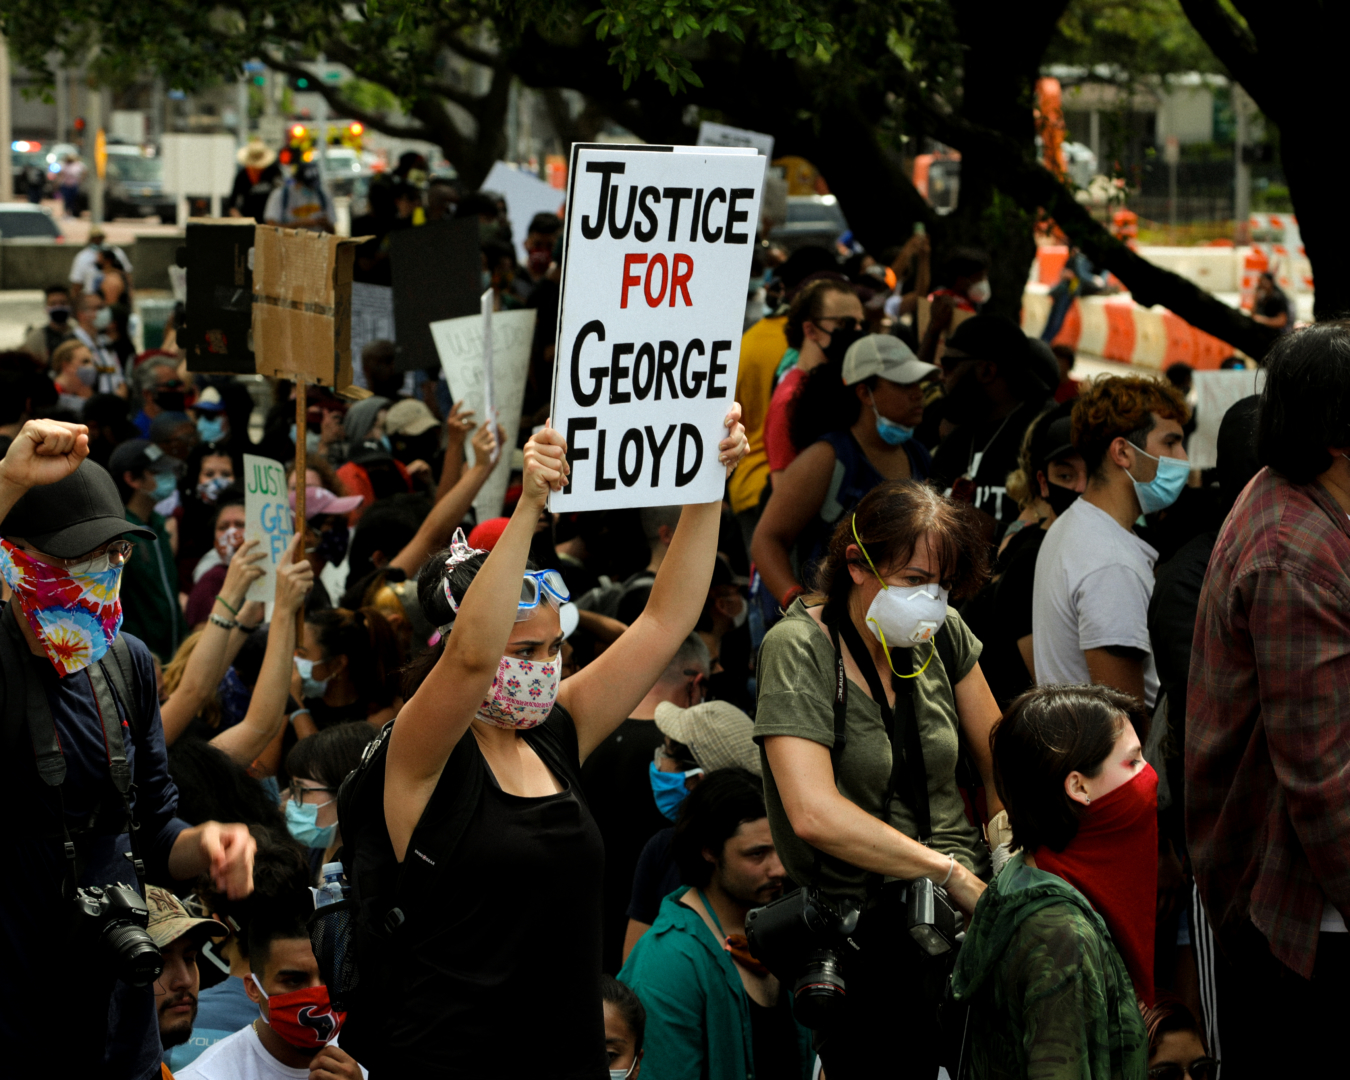 The death of George Floyd last year in Minneapolis sparked worldwide protests against police brutality, including many demonstrations in Houston. Former police officer Derek Chauvin was found guilty in Floyd's death on Tuesday afternoon. | Mikol Kindle Jr./The Cougar